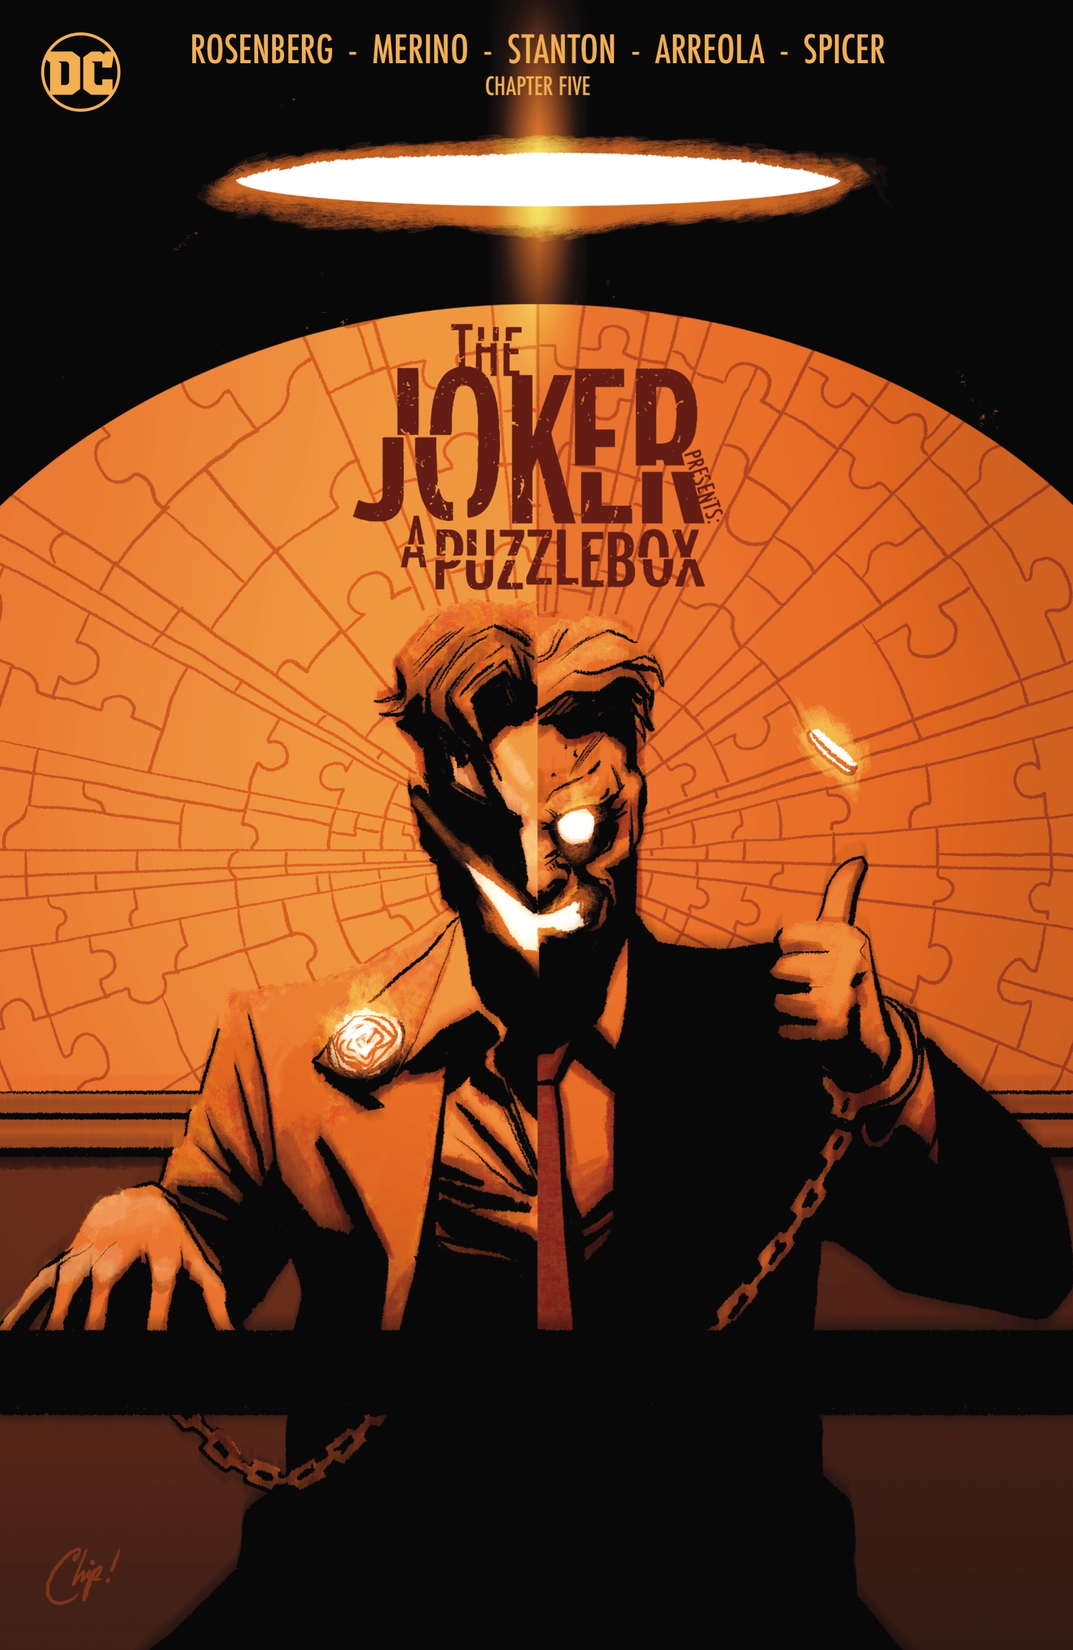 The Joker Presents: A Puzzlebox Director's Cut #5 preview images